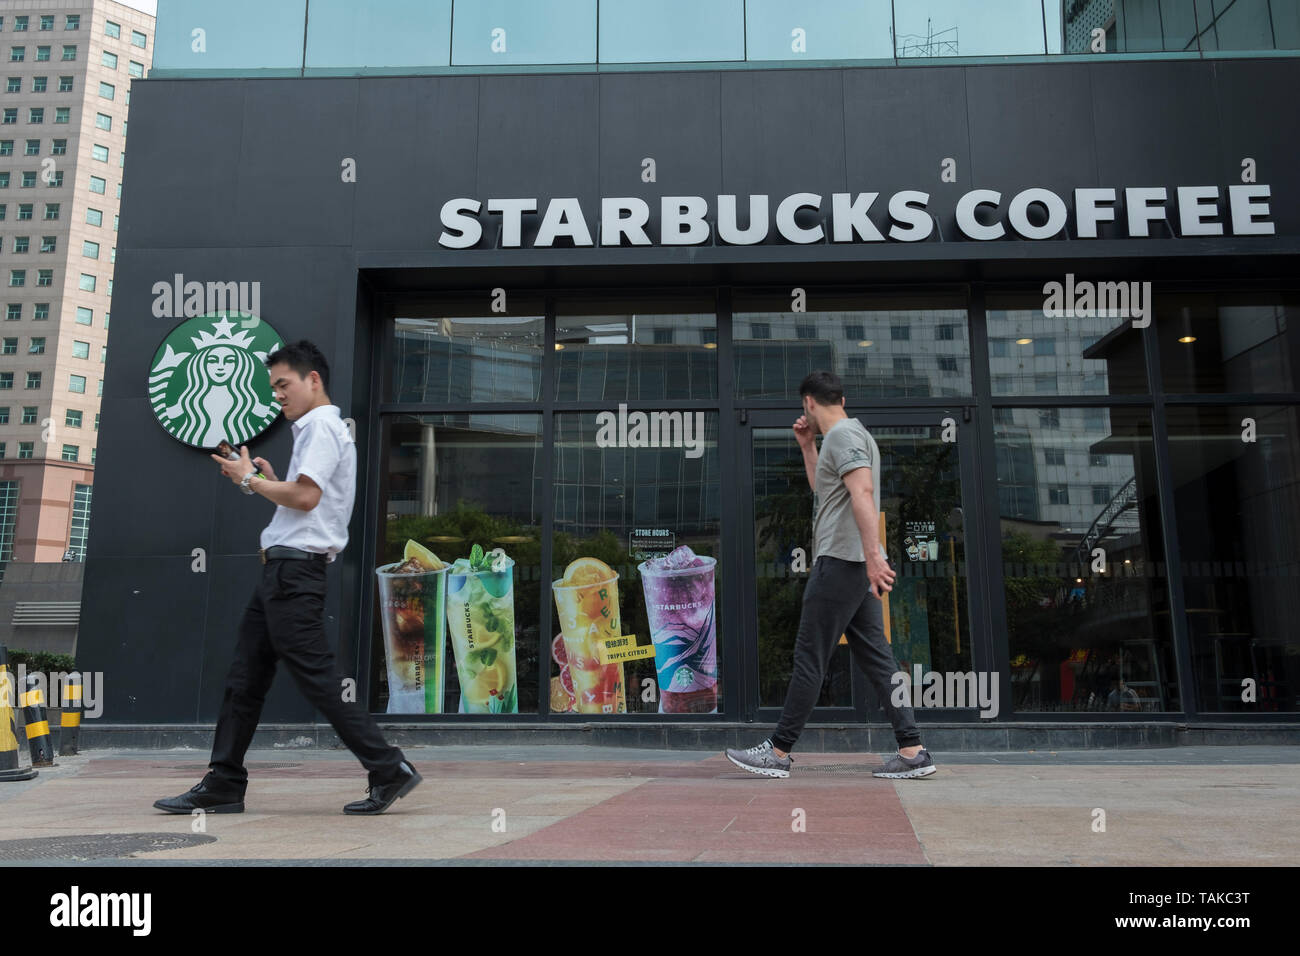 A Starbucks Coffee shop in Beijing, China. 25-May-2019 Stock Photo